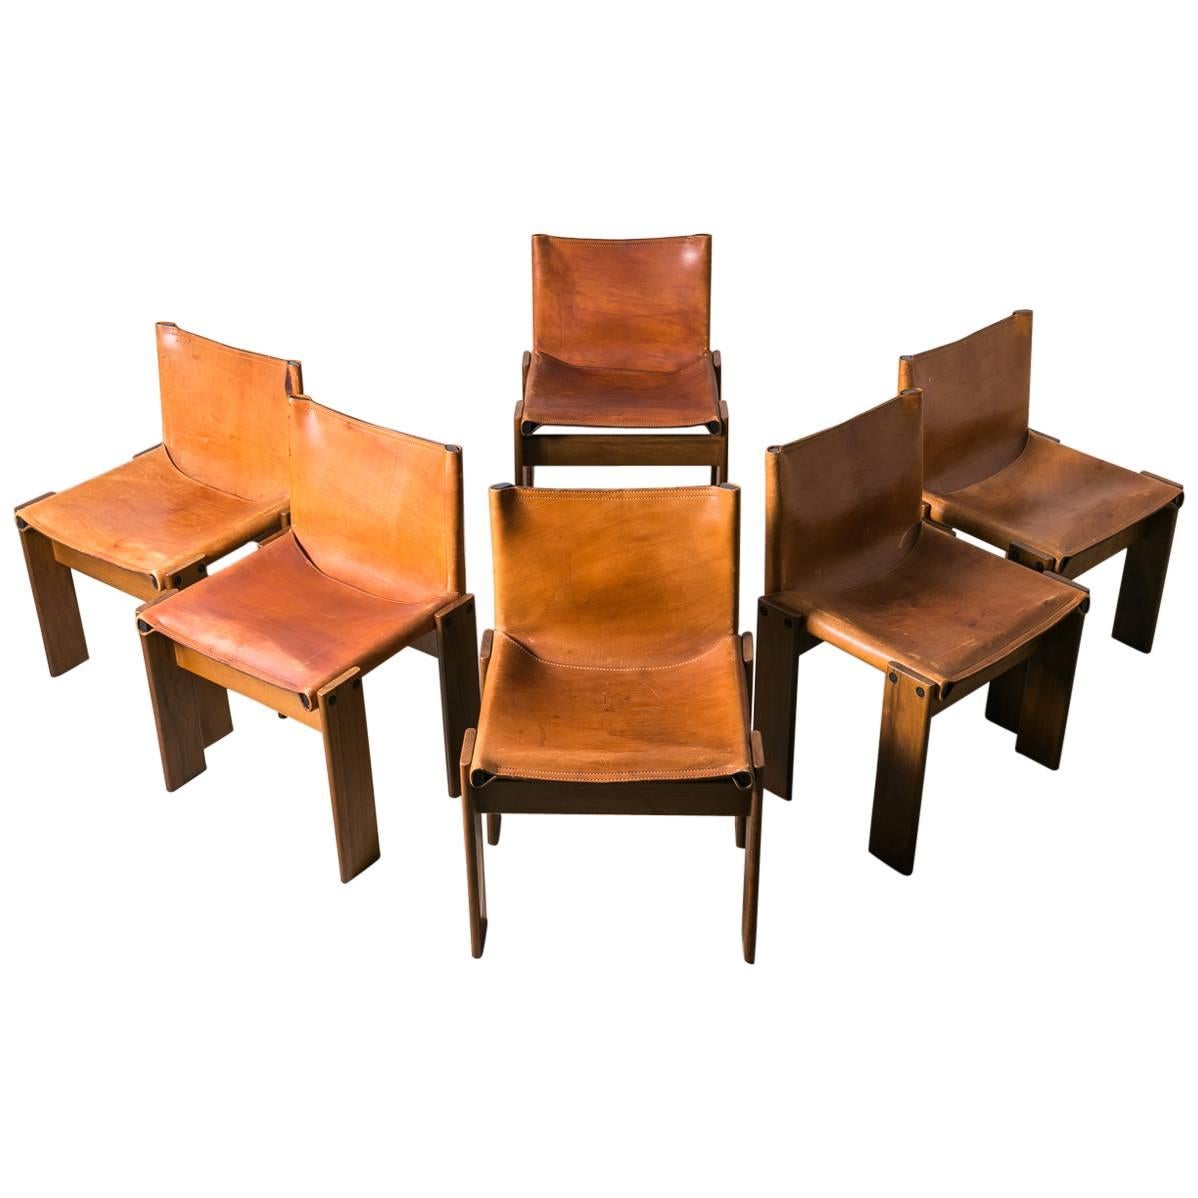 Set of Six "Monk" Chairs by Afra & Tobia Scarpa, 1974, Italy